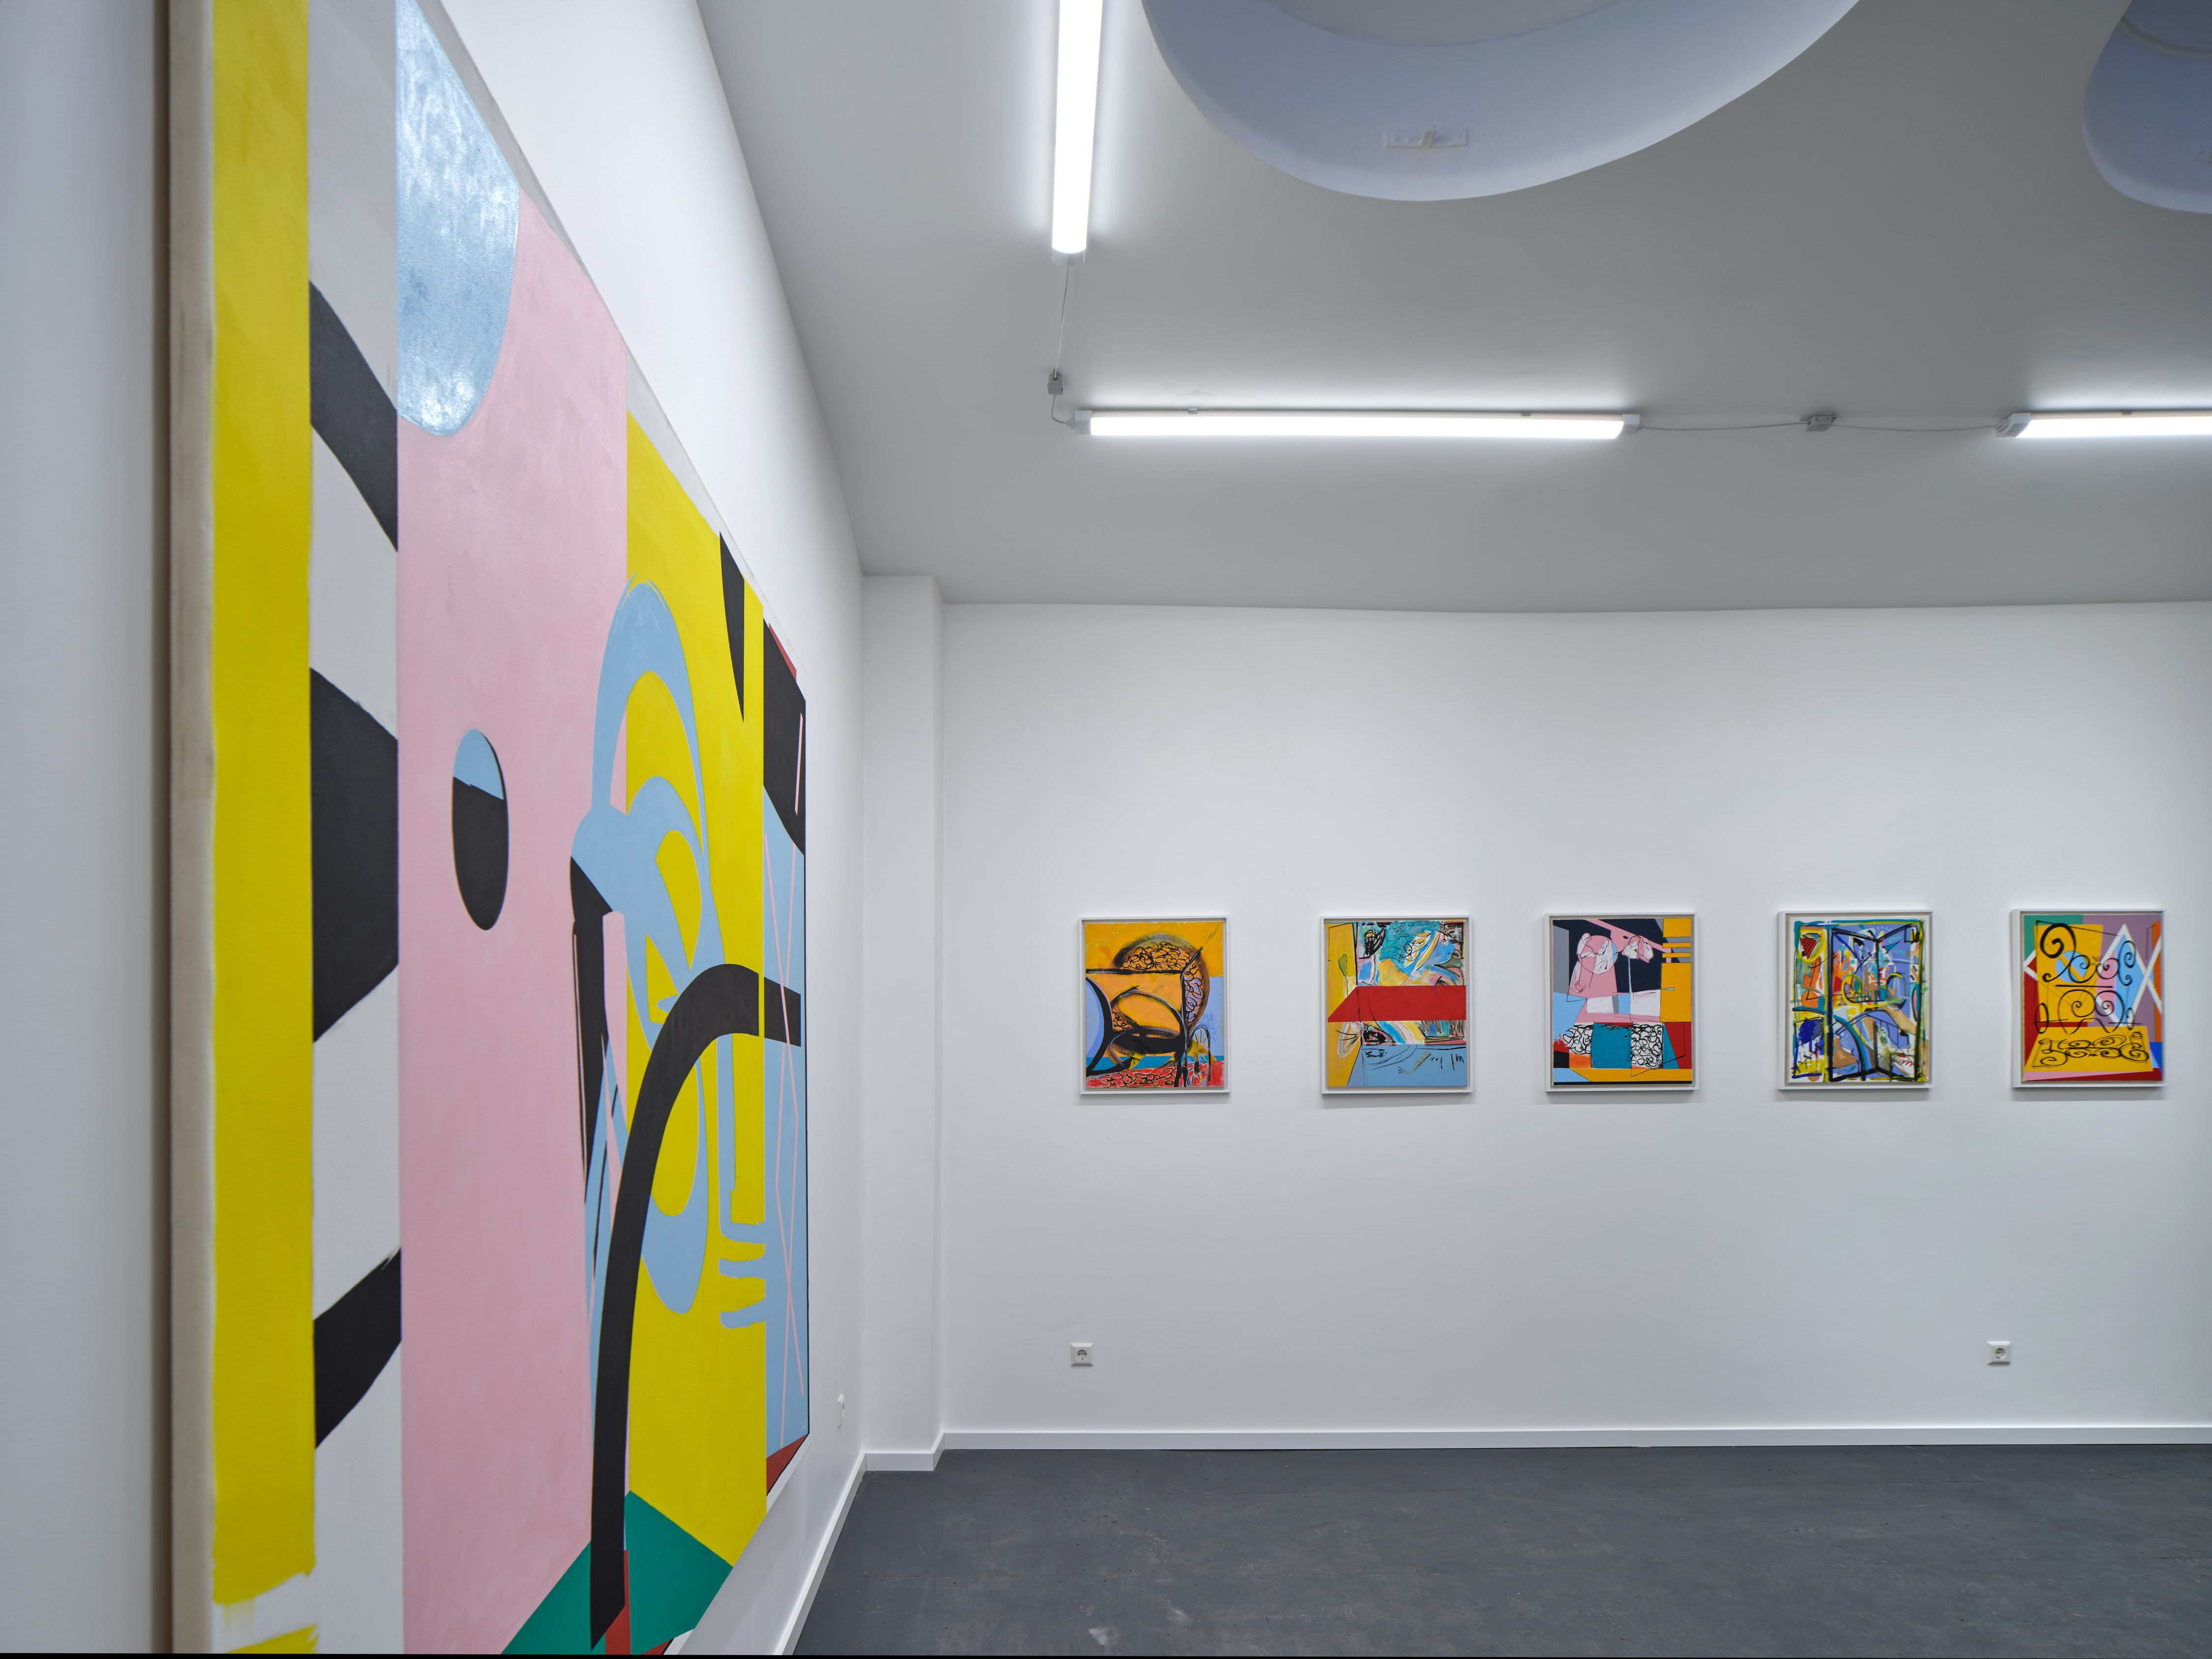 Group Show | Part 2
13.01. - 12.02.22

Thierry Harpes
Arny Schmit
Pascal Vicollet